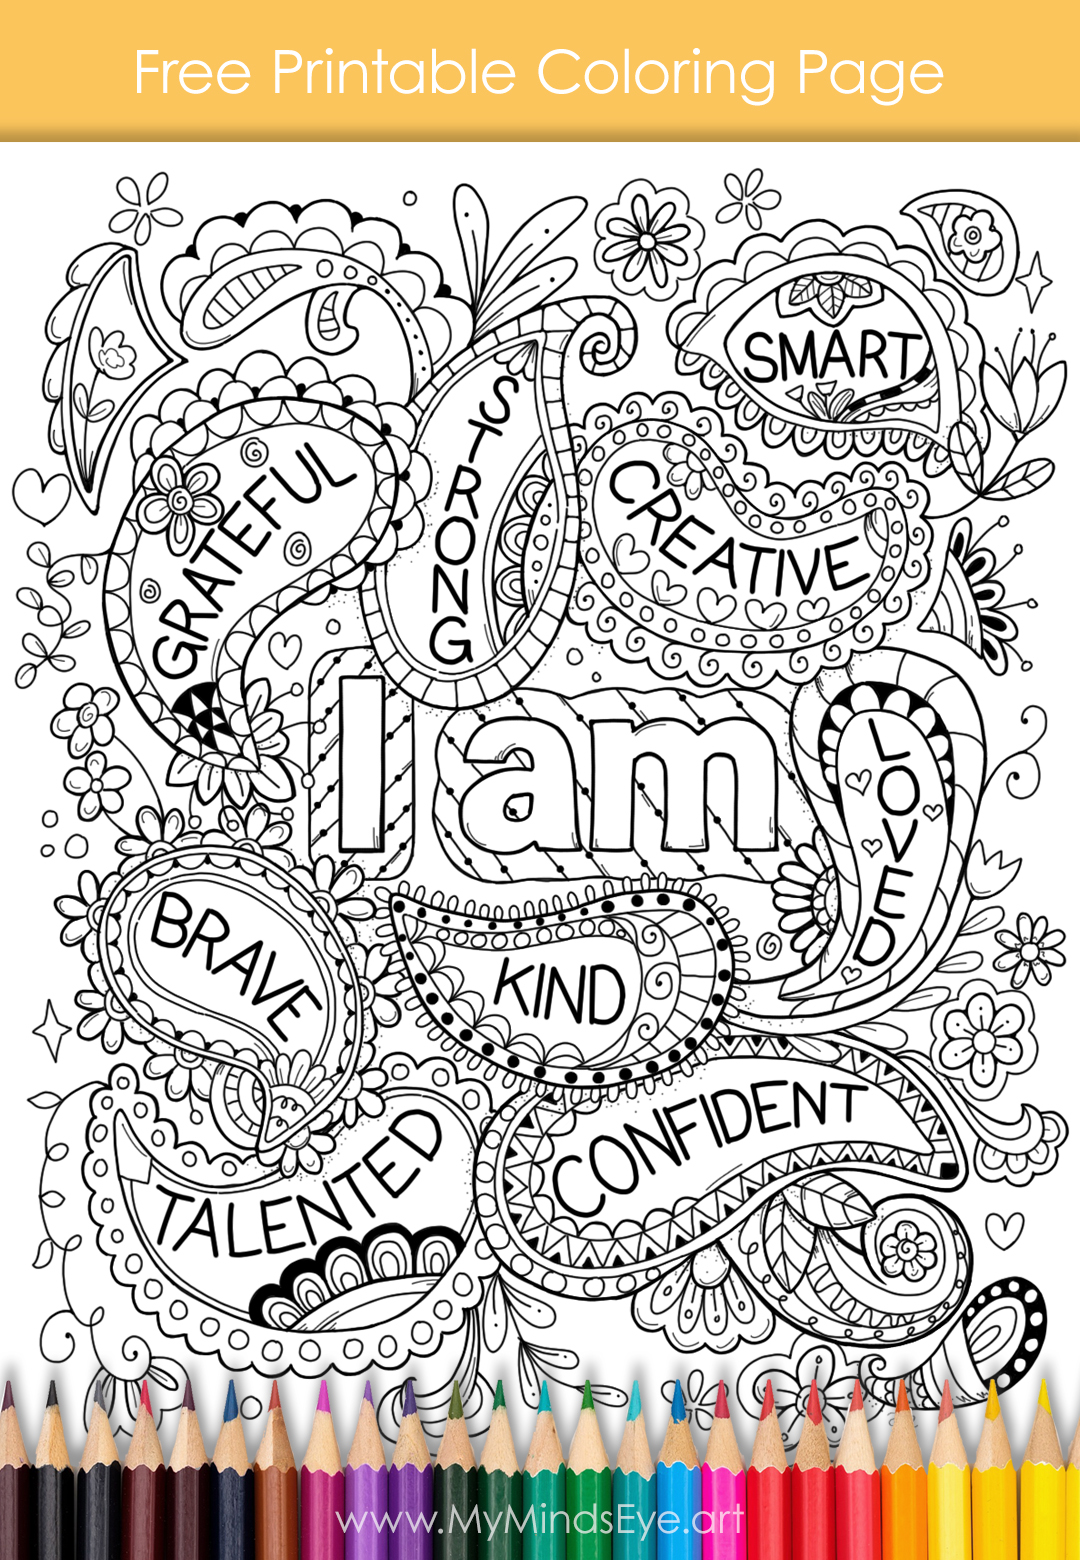 Image of a coloring sheet with paisley doodle designs and I am Affirmations on it.